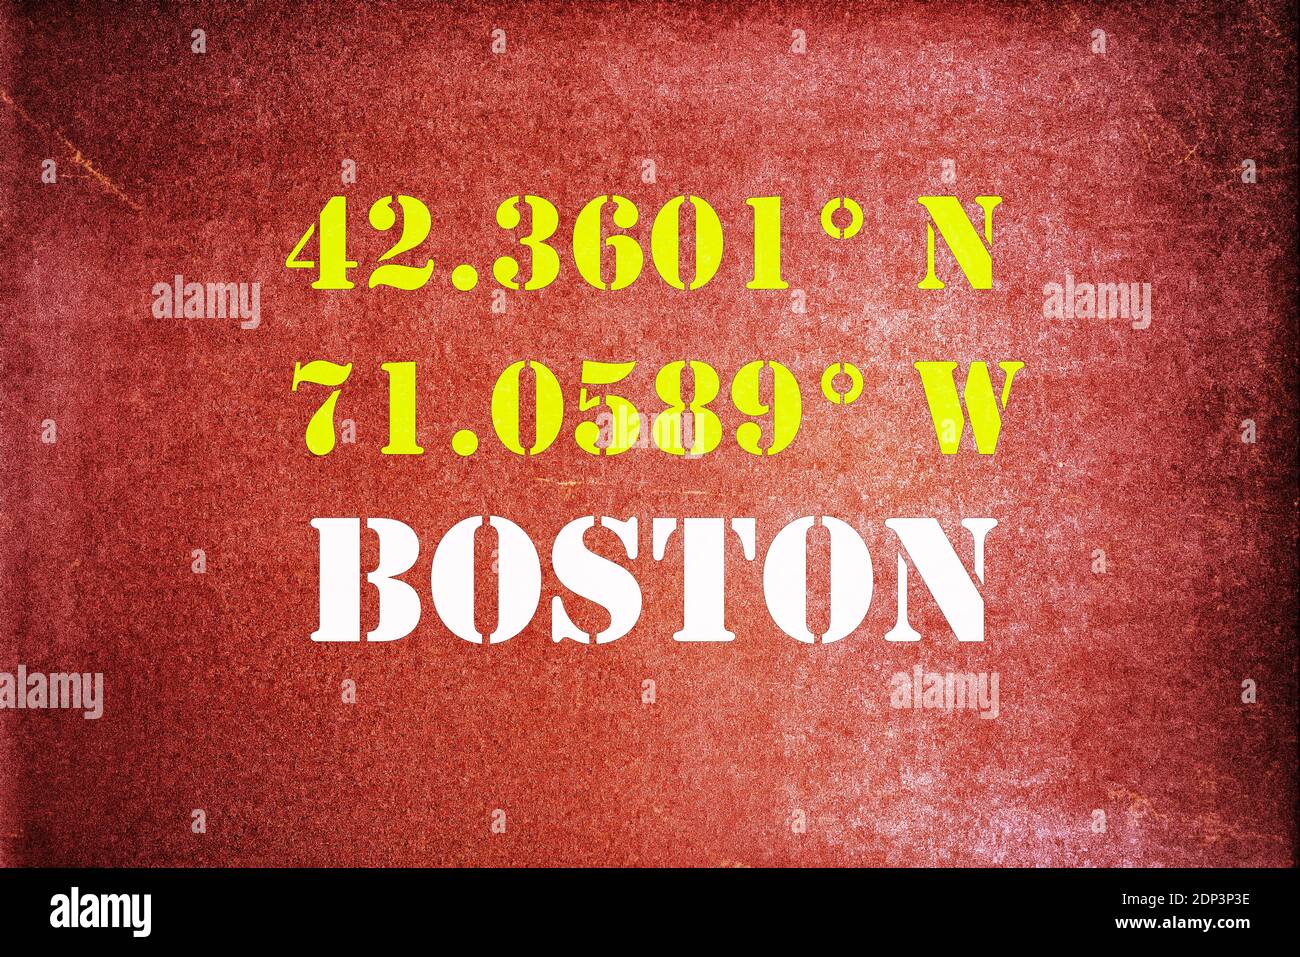 GPS coordinates for Boston Massachusetts with a vintage/retro typography  effect Stock Photo - Alamy